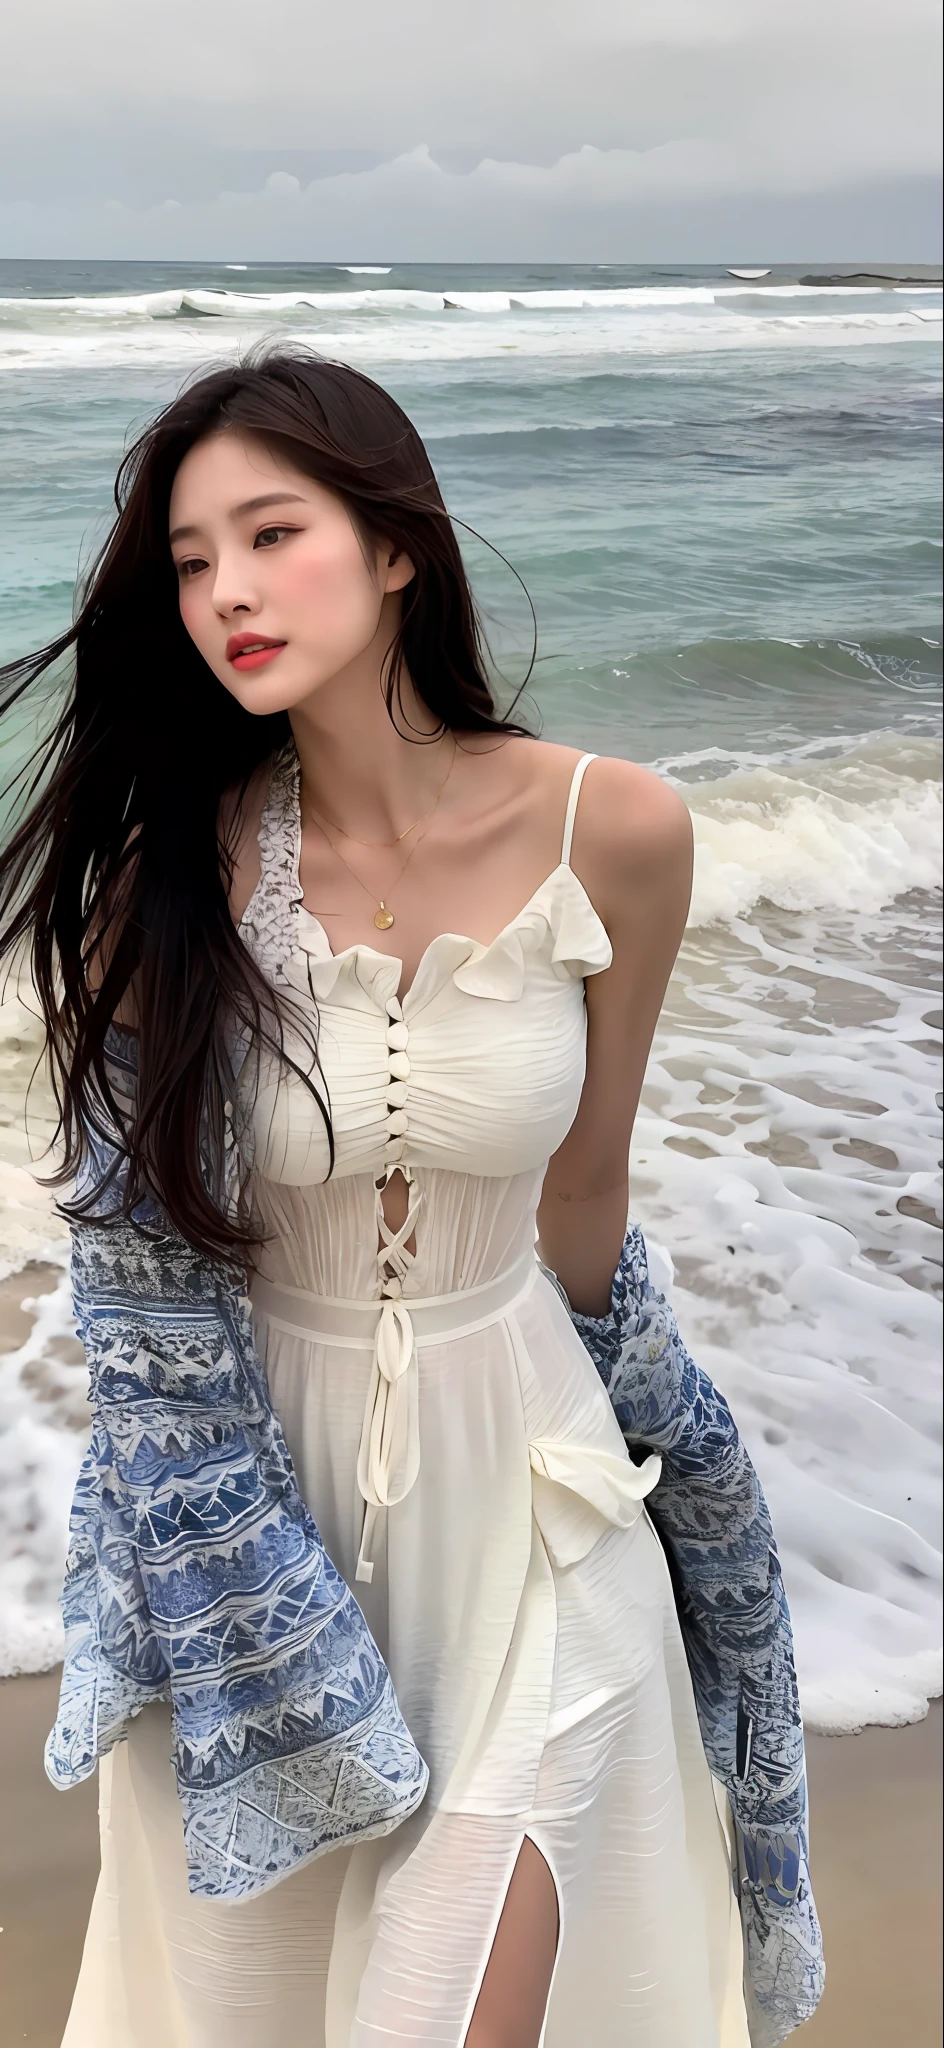 (Masterpiece), (Best Quality), (detailed), 1 girl, 22 years old, playful expression, big breasts, bare breasts, bikini, long hair, beautiful, natural, exposed, intellectual, on the beach near the ocean, Jaeyeon Nam in a white dress walking, beautiful young Korean woman, graceful posture, light sun, free and free, a fashion model who is acclaimed in the Asian women's fashion industry, she walks lightly on the beach, The beautiful temperament of an Asian girl is vividly displayed, interpreting the charm and style of Asian women.